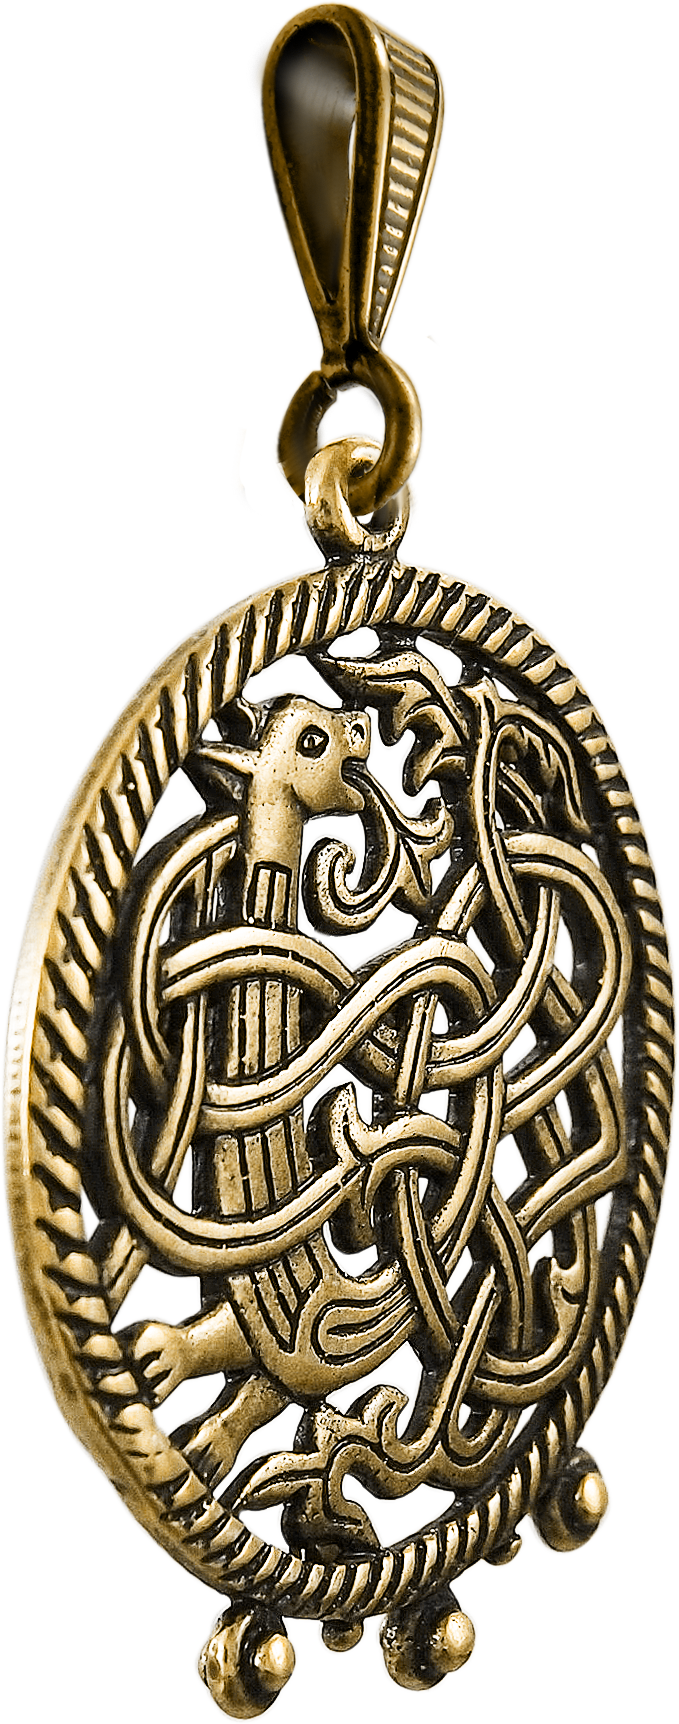 Slotted pendant "Unknown animal"